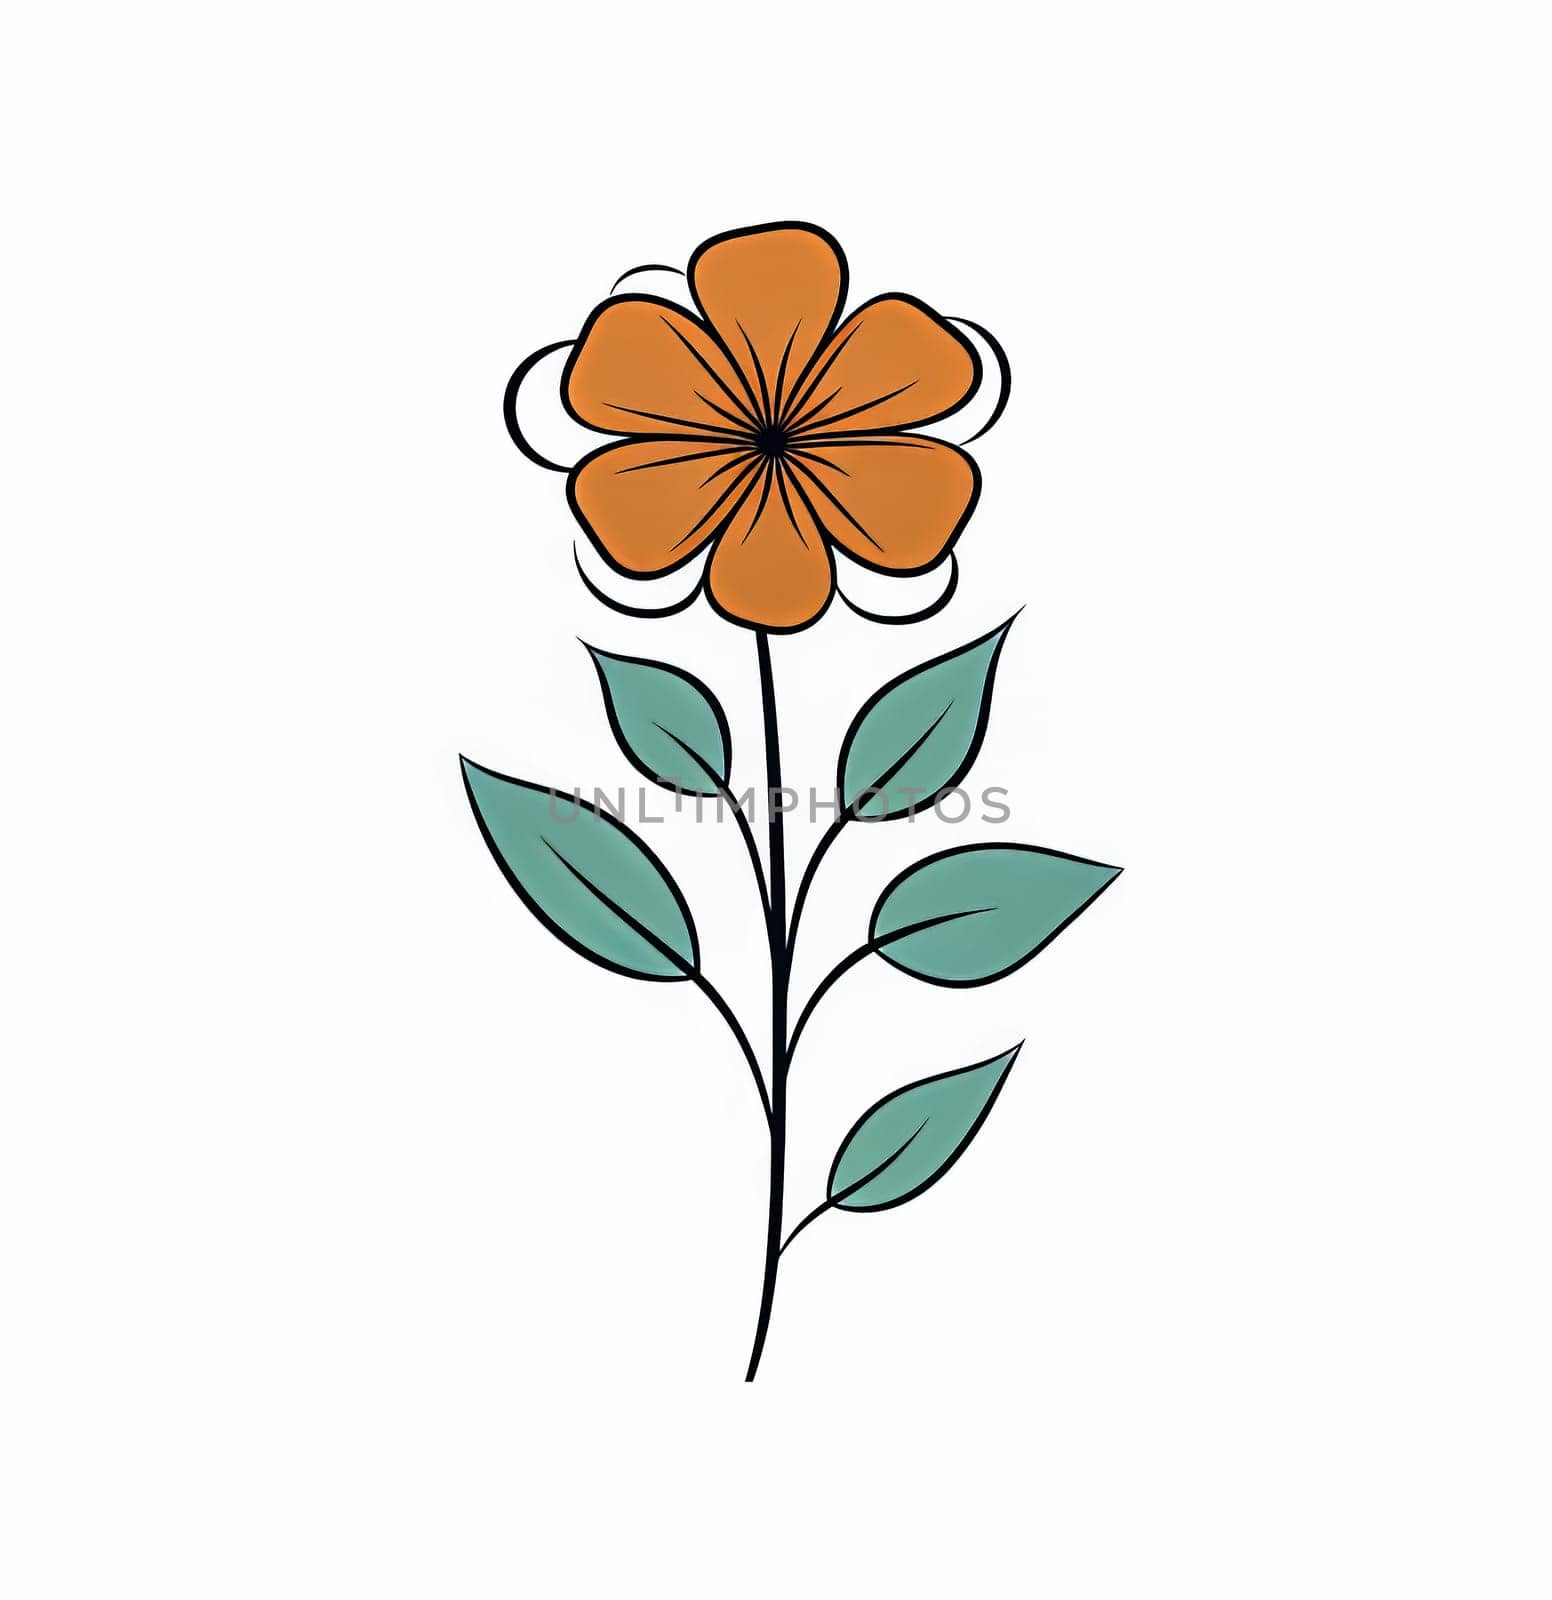 Minimalistic floral botanical line art featuring bouquets of wild and garden plants, branches, leaves, flowers, and herbs. Ideal for logos, tattoos, invitations, and cards.